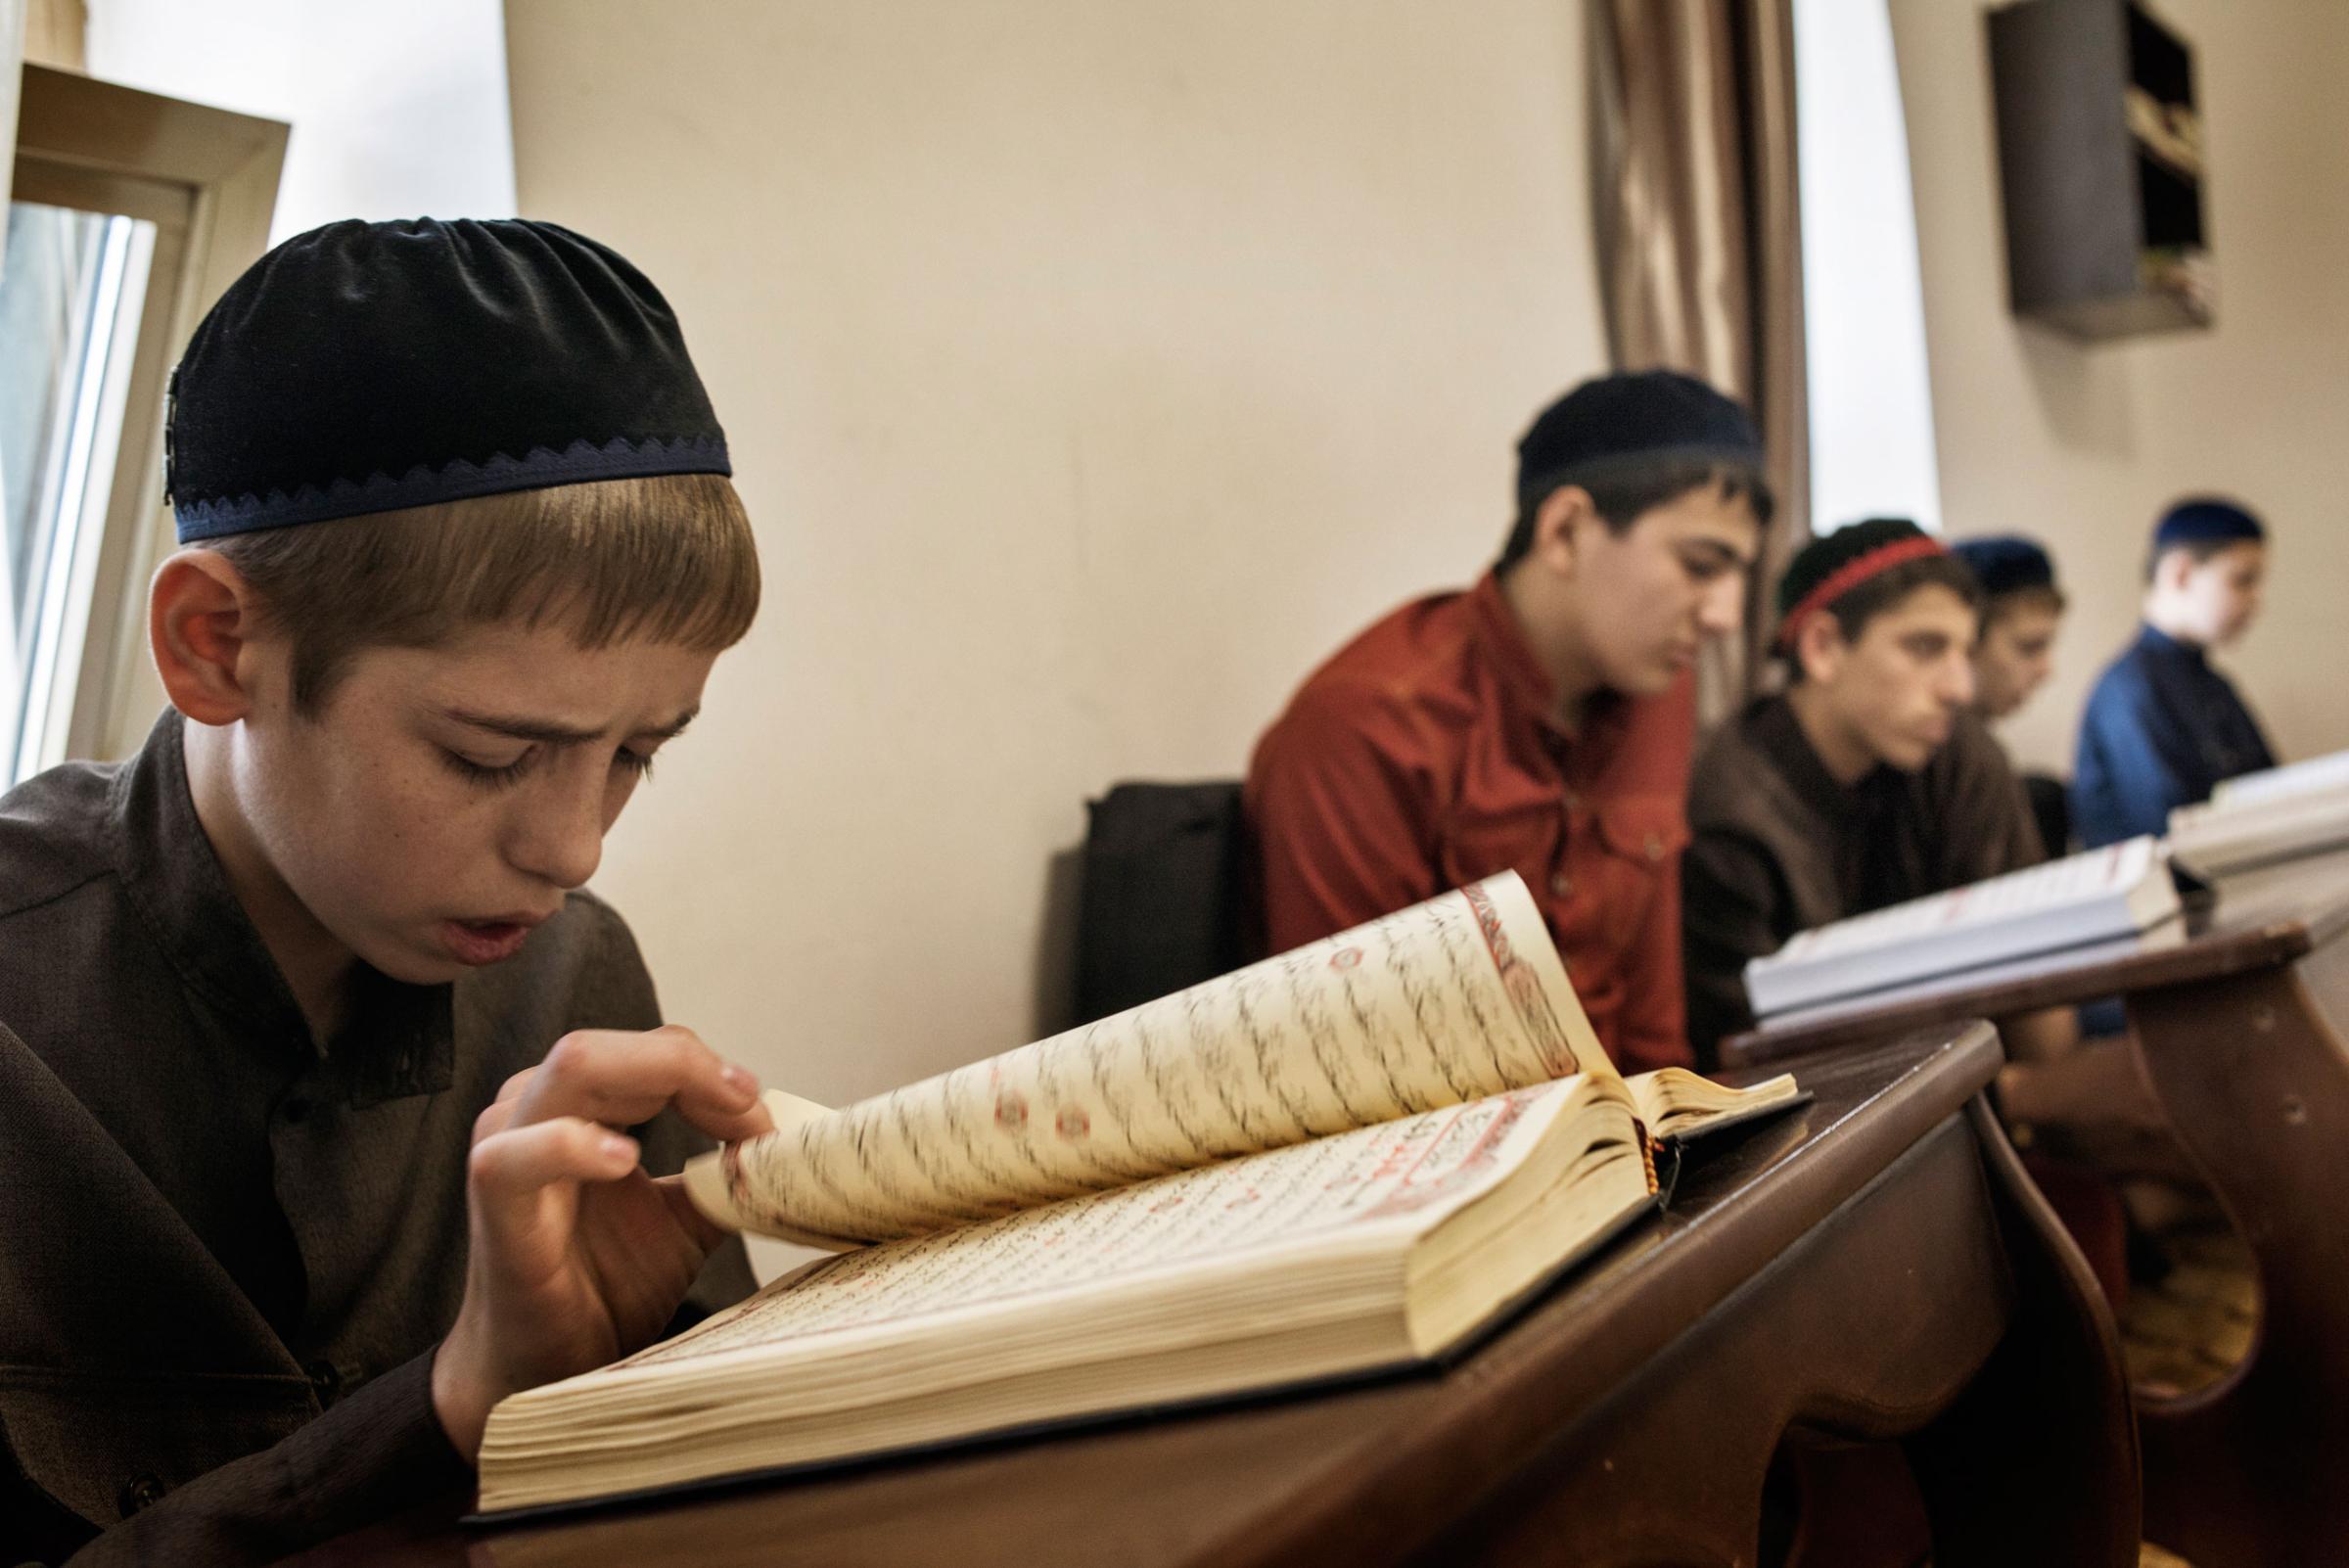 Boys study to become hafiz, or reciters of the Koran at a boarding school in Grozny, Chechnya, April 19, 2015.Yuri kozyrev—NOOR for TIME